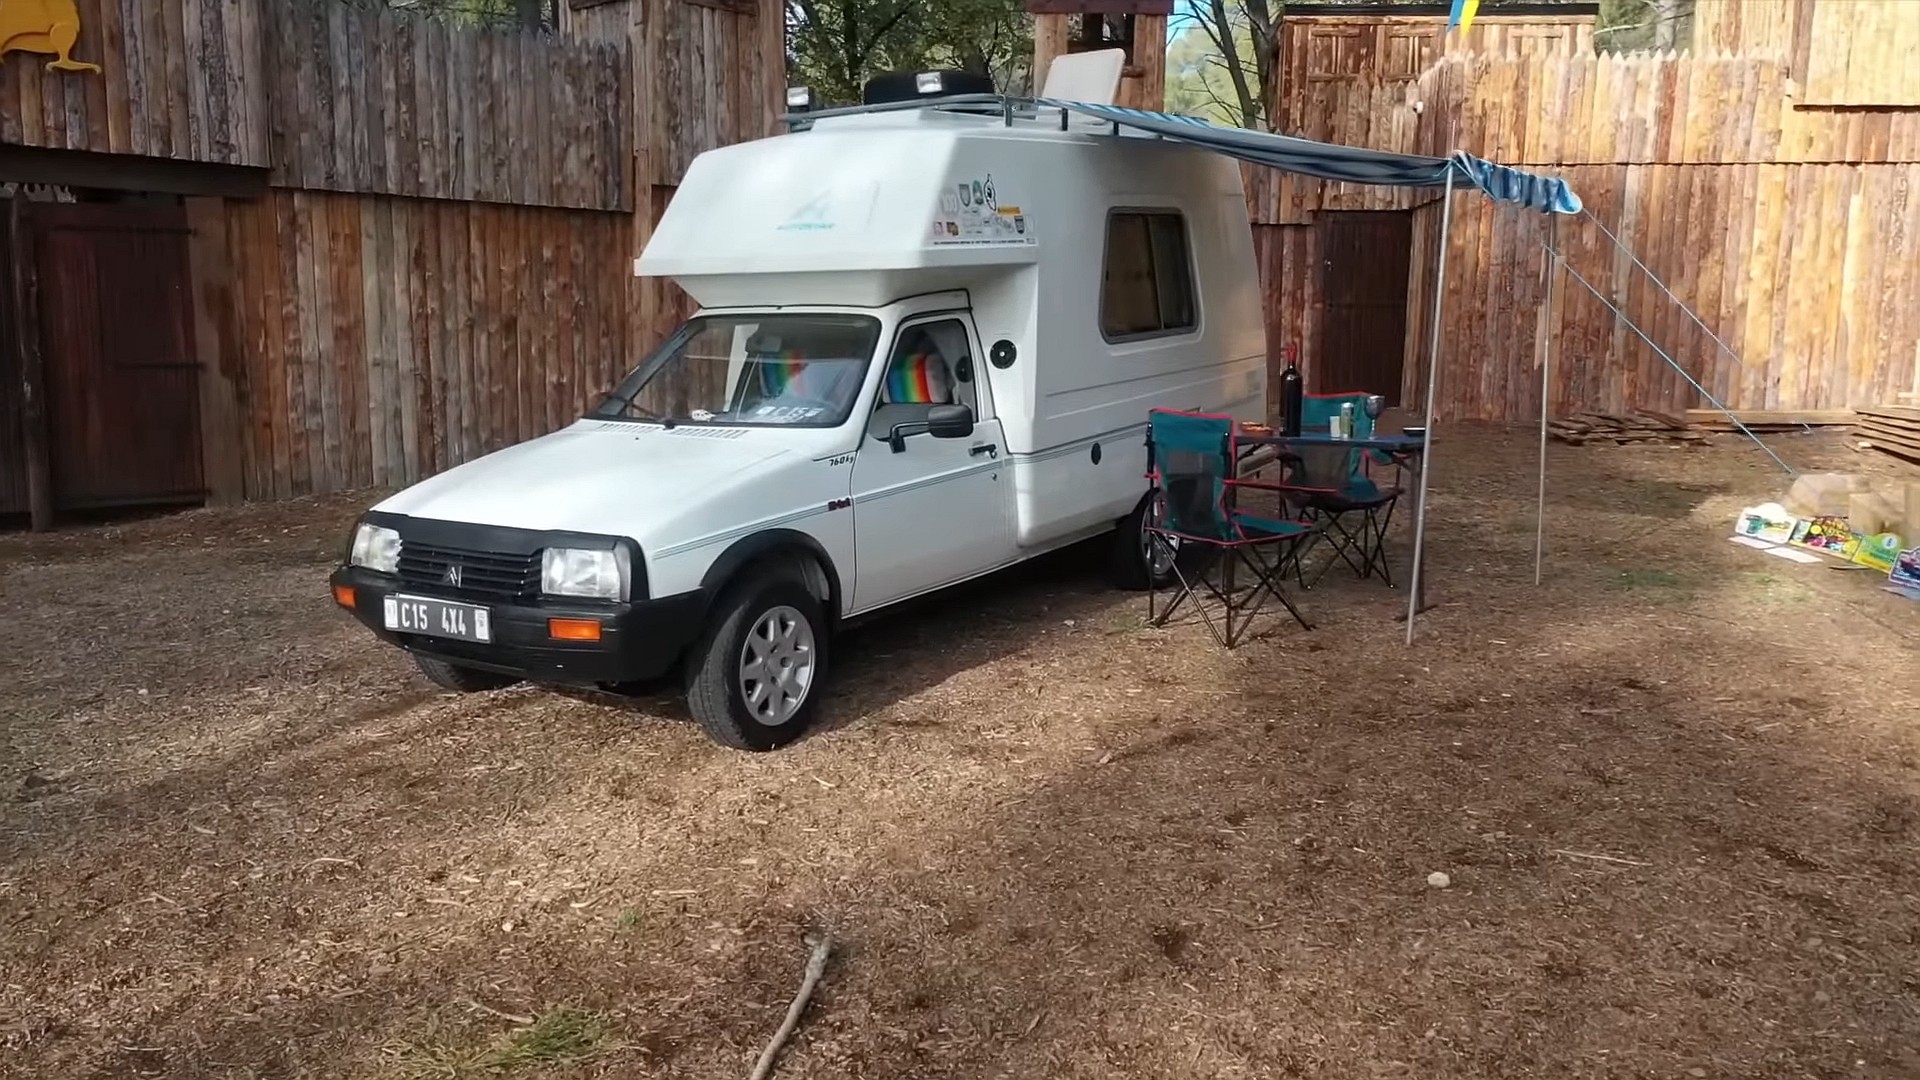 1990 Citroen C15 Autostar Is a Tiny Home on Wheels and the Last of